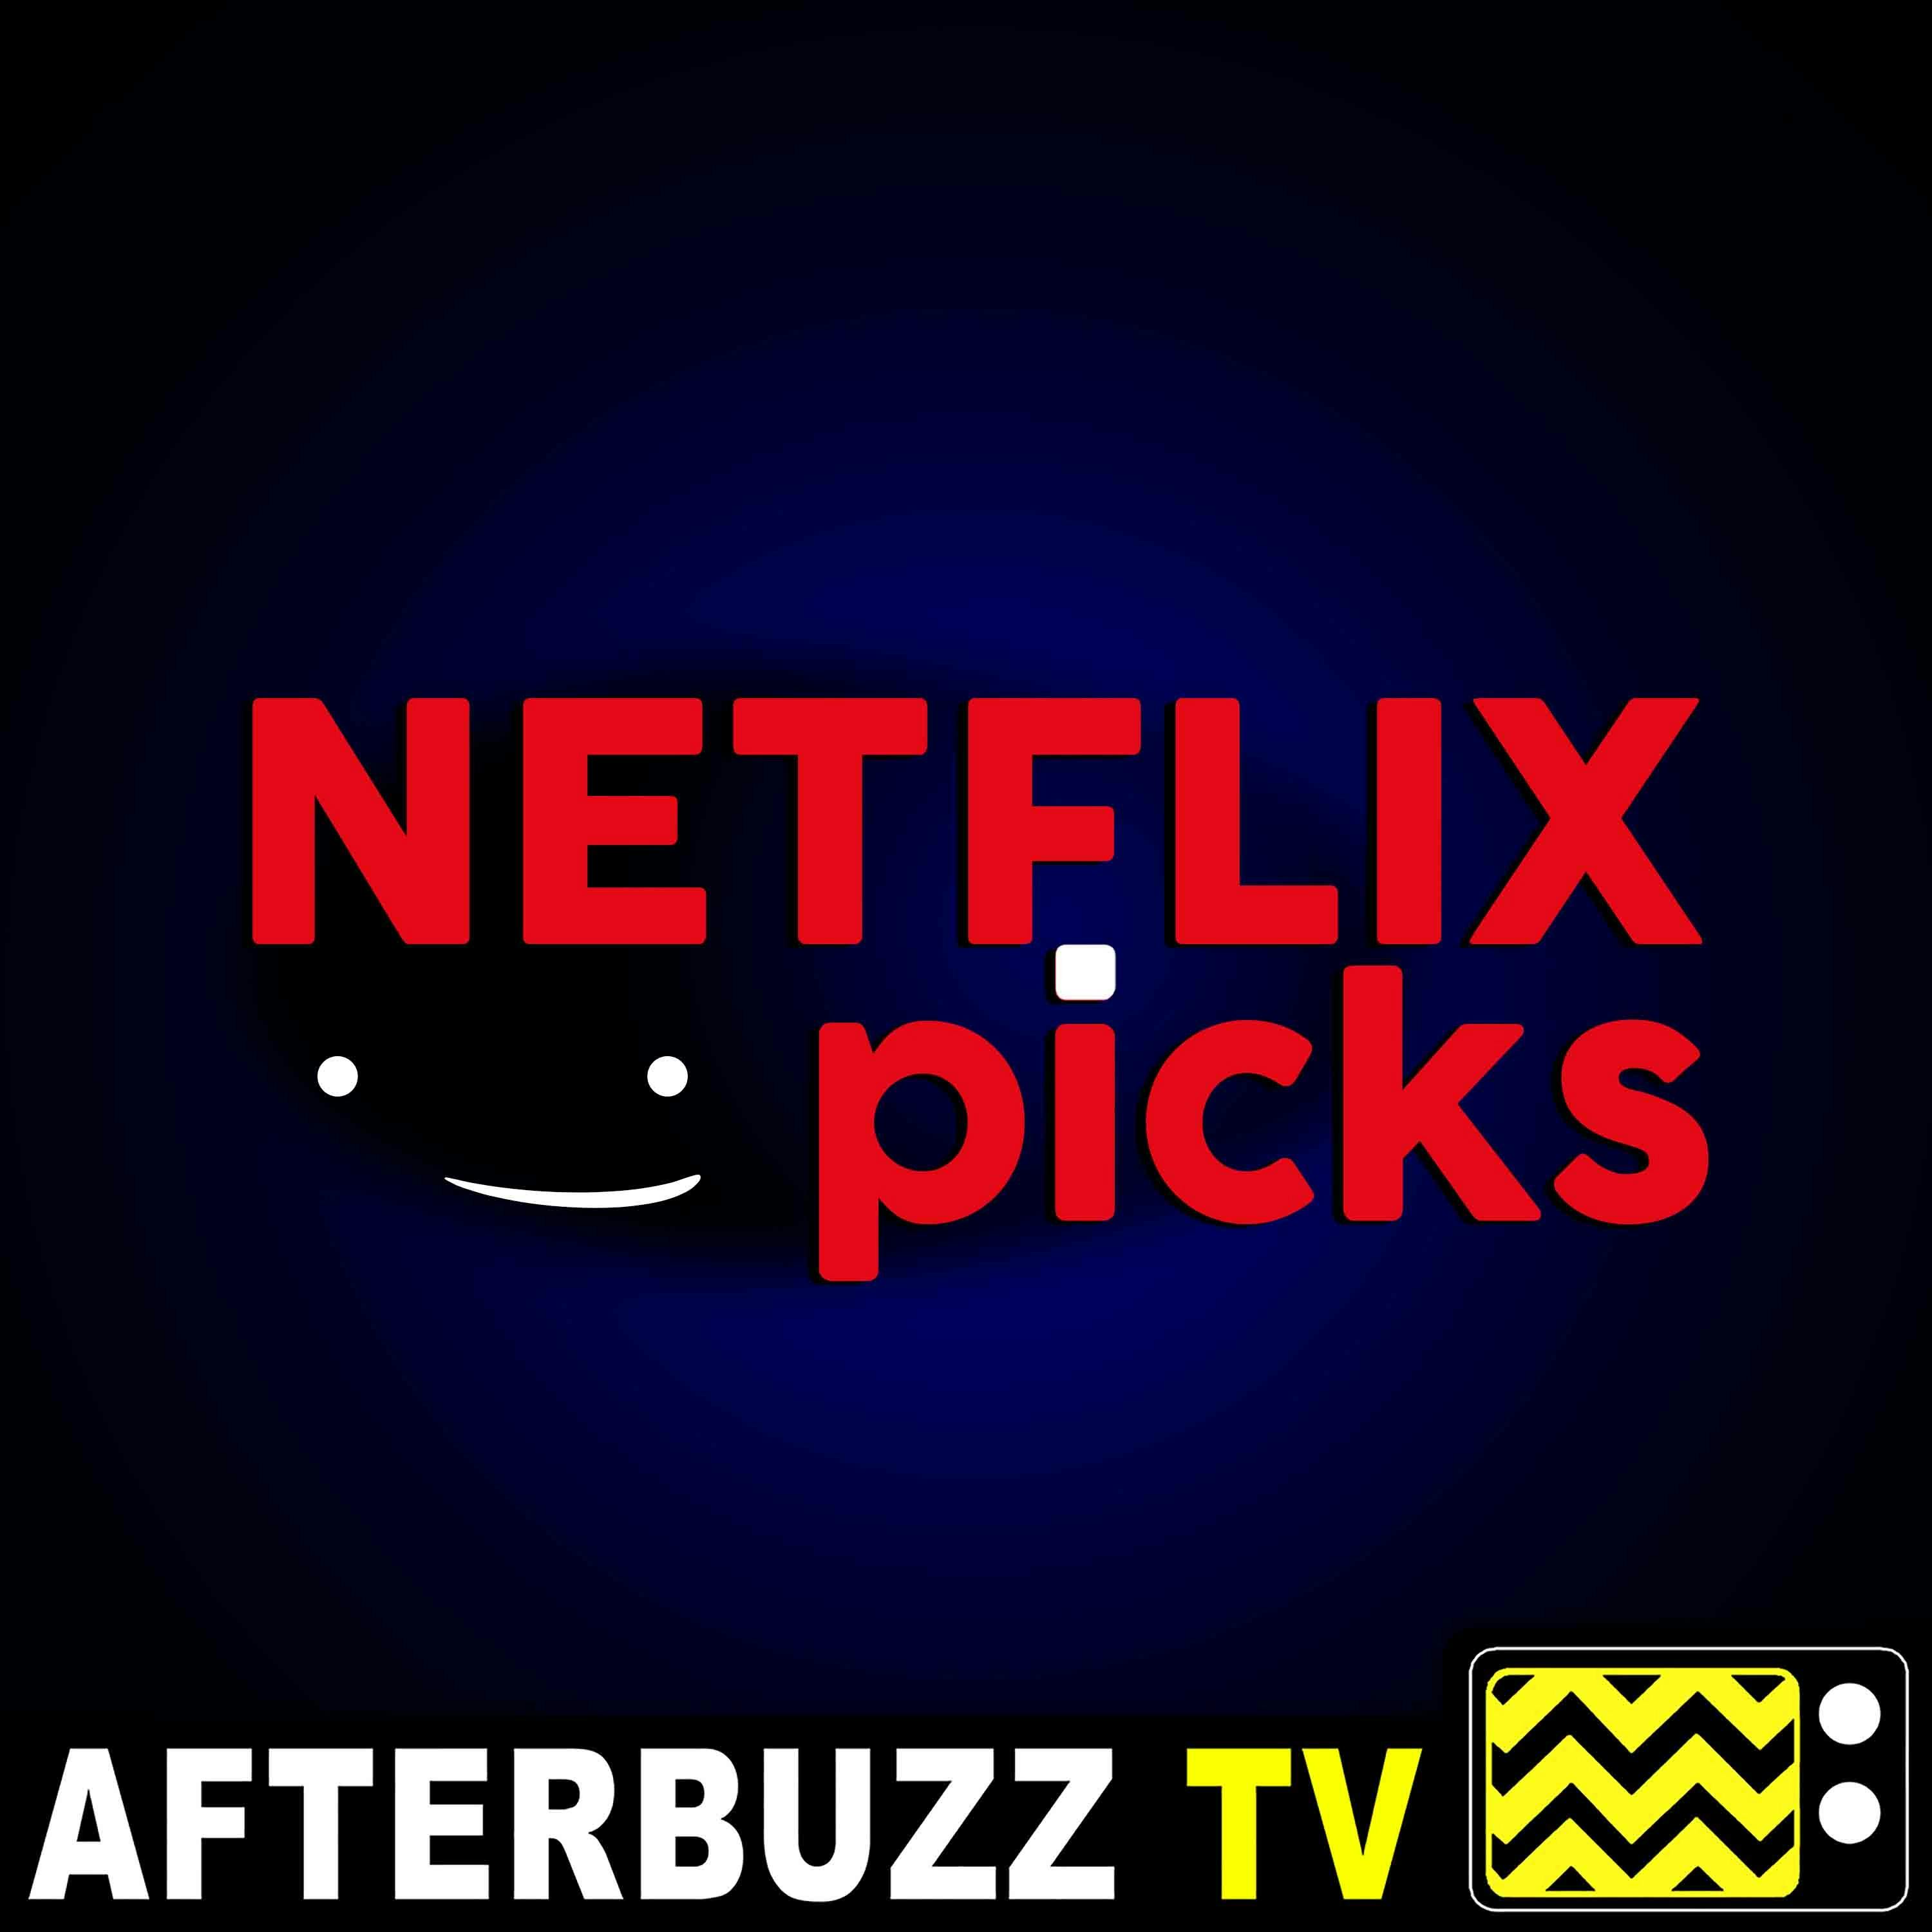 13 Reasons Why you should watch season 2 | Top 5 Upcoming Releases – Netflix Picks | AfterBuzz TV